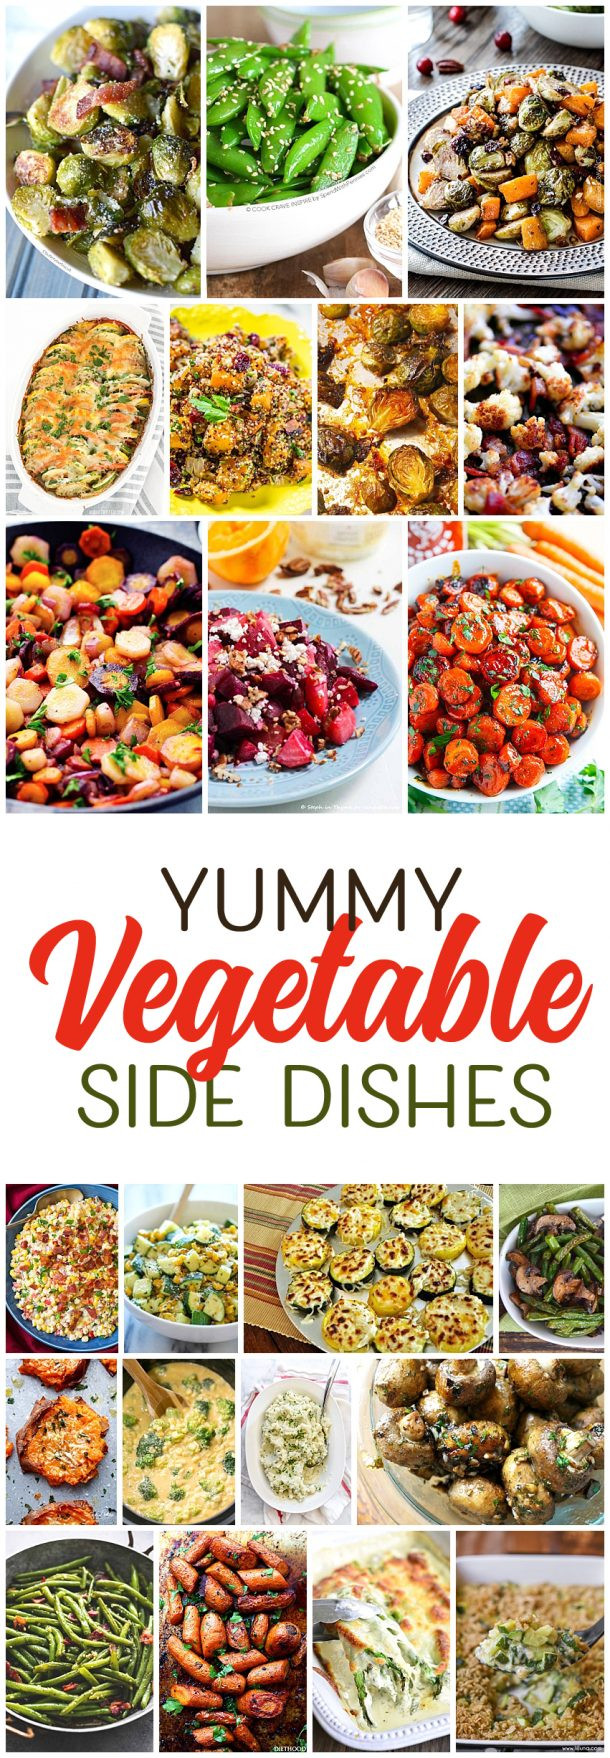 Yummy Vegetarian Recipes
 Yummy Ve able Side Dishes You Will LOVE landeelu